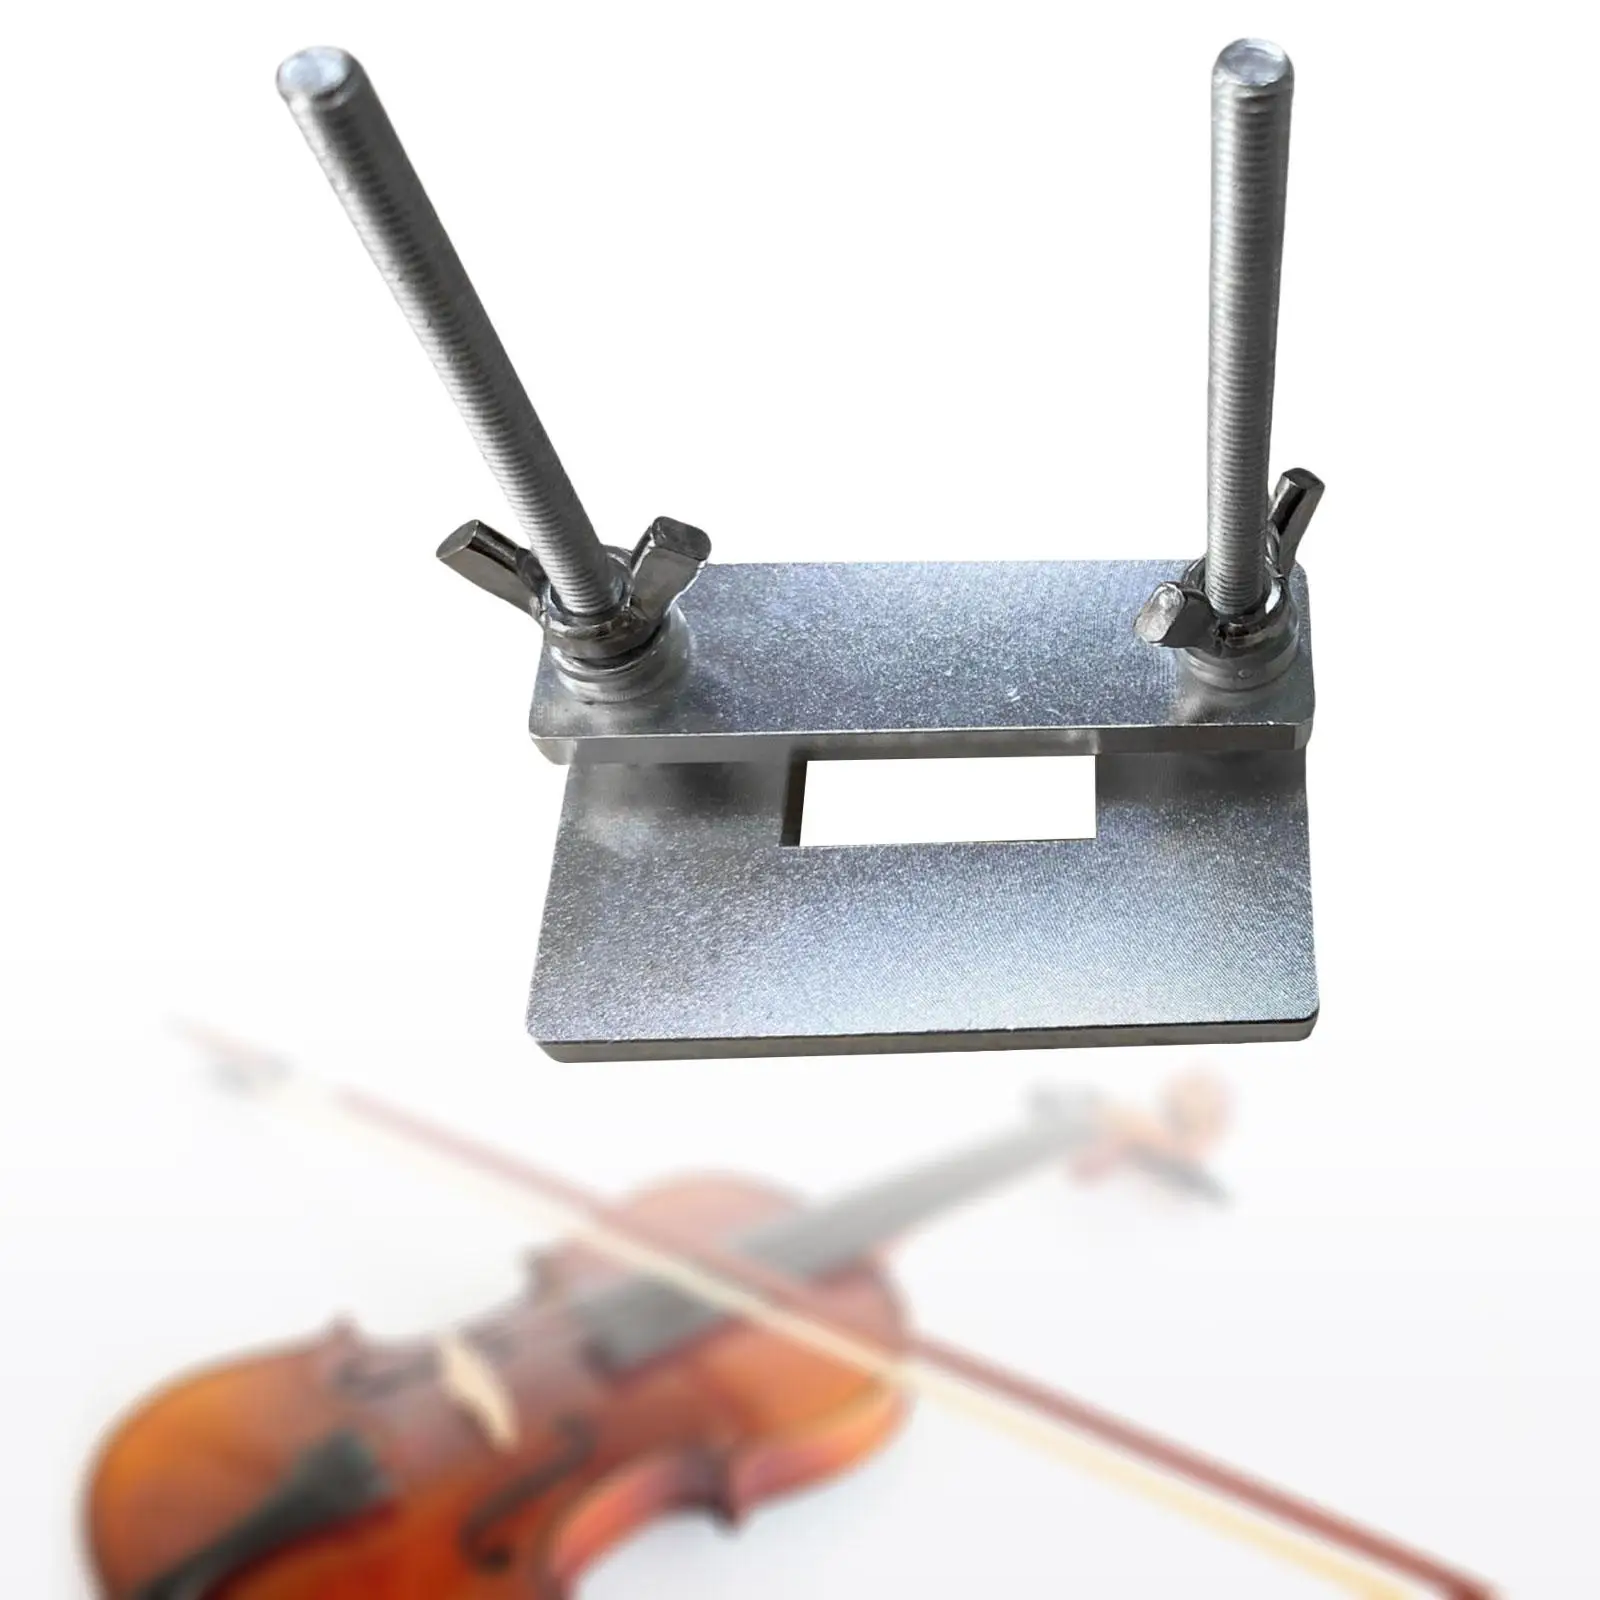 Cello Repair Clamp Professional Adjustable Portable Easy to Use Luthier Tools Cello Making Tool for Violinist Fix Tool